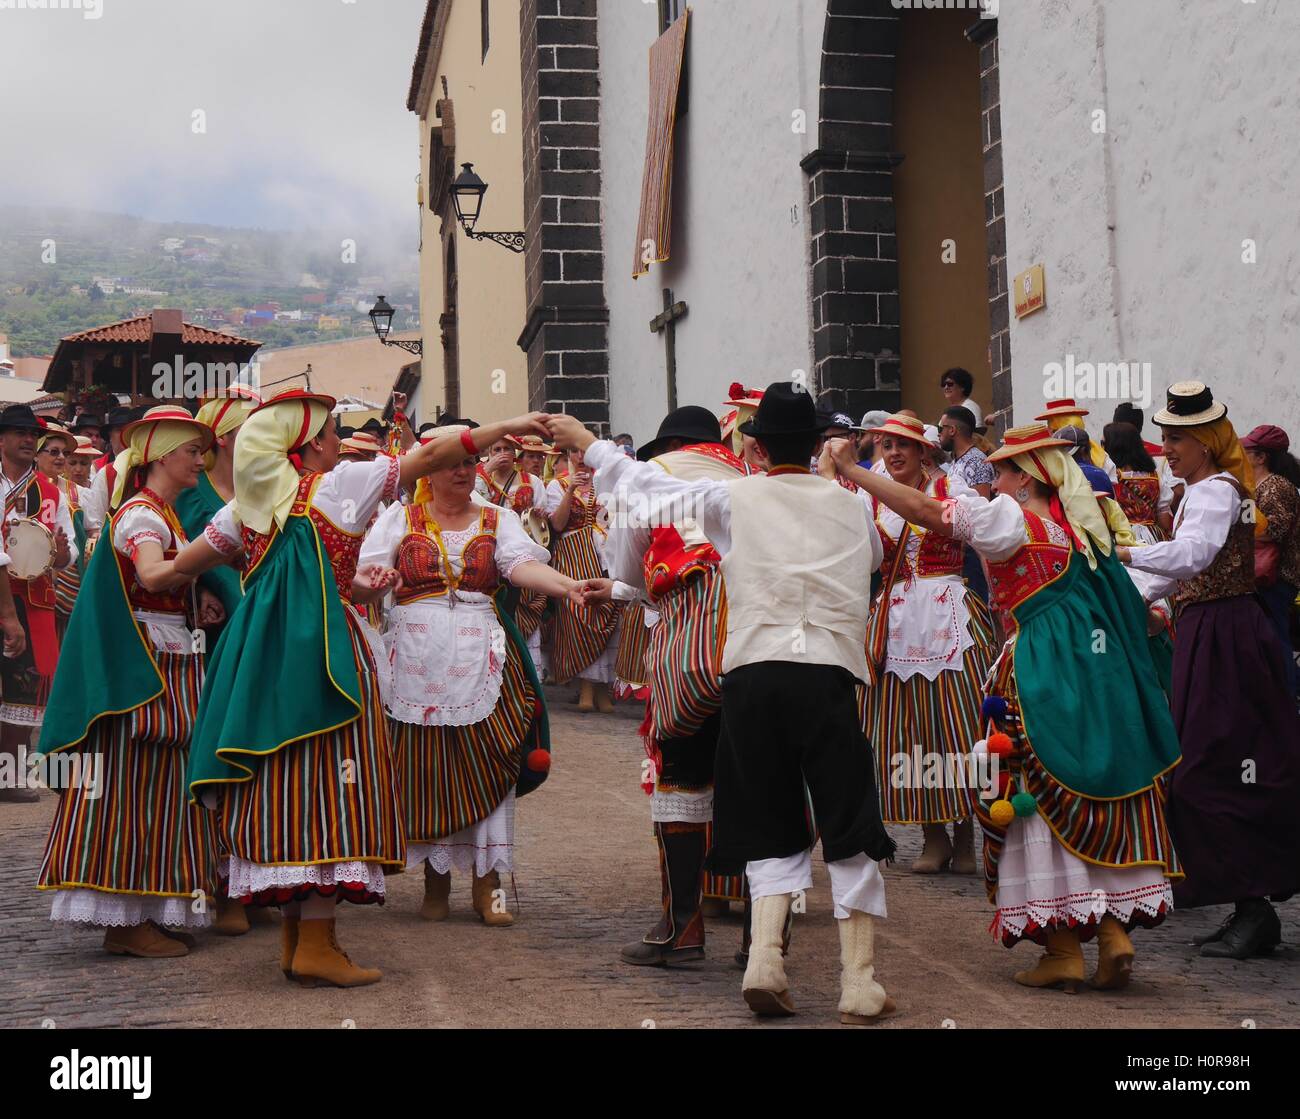 People in regional costumes dancing at Romería de San Isidro Labrador,a festival to celebrate country traditions, La Orotava, Tenerife, Canary Islands Stock Photo